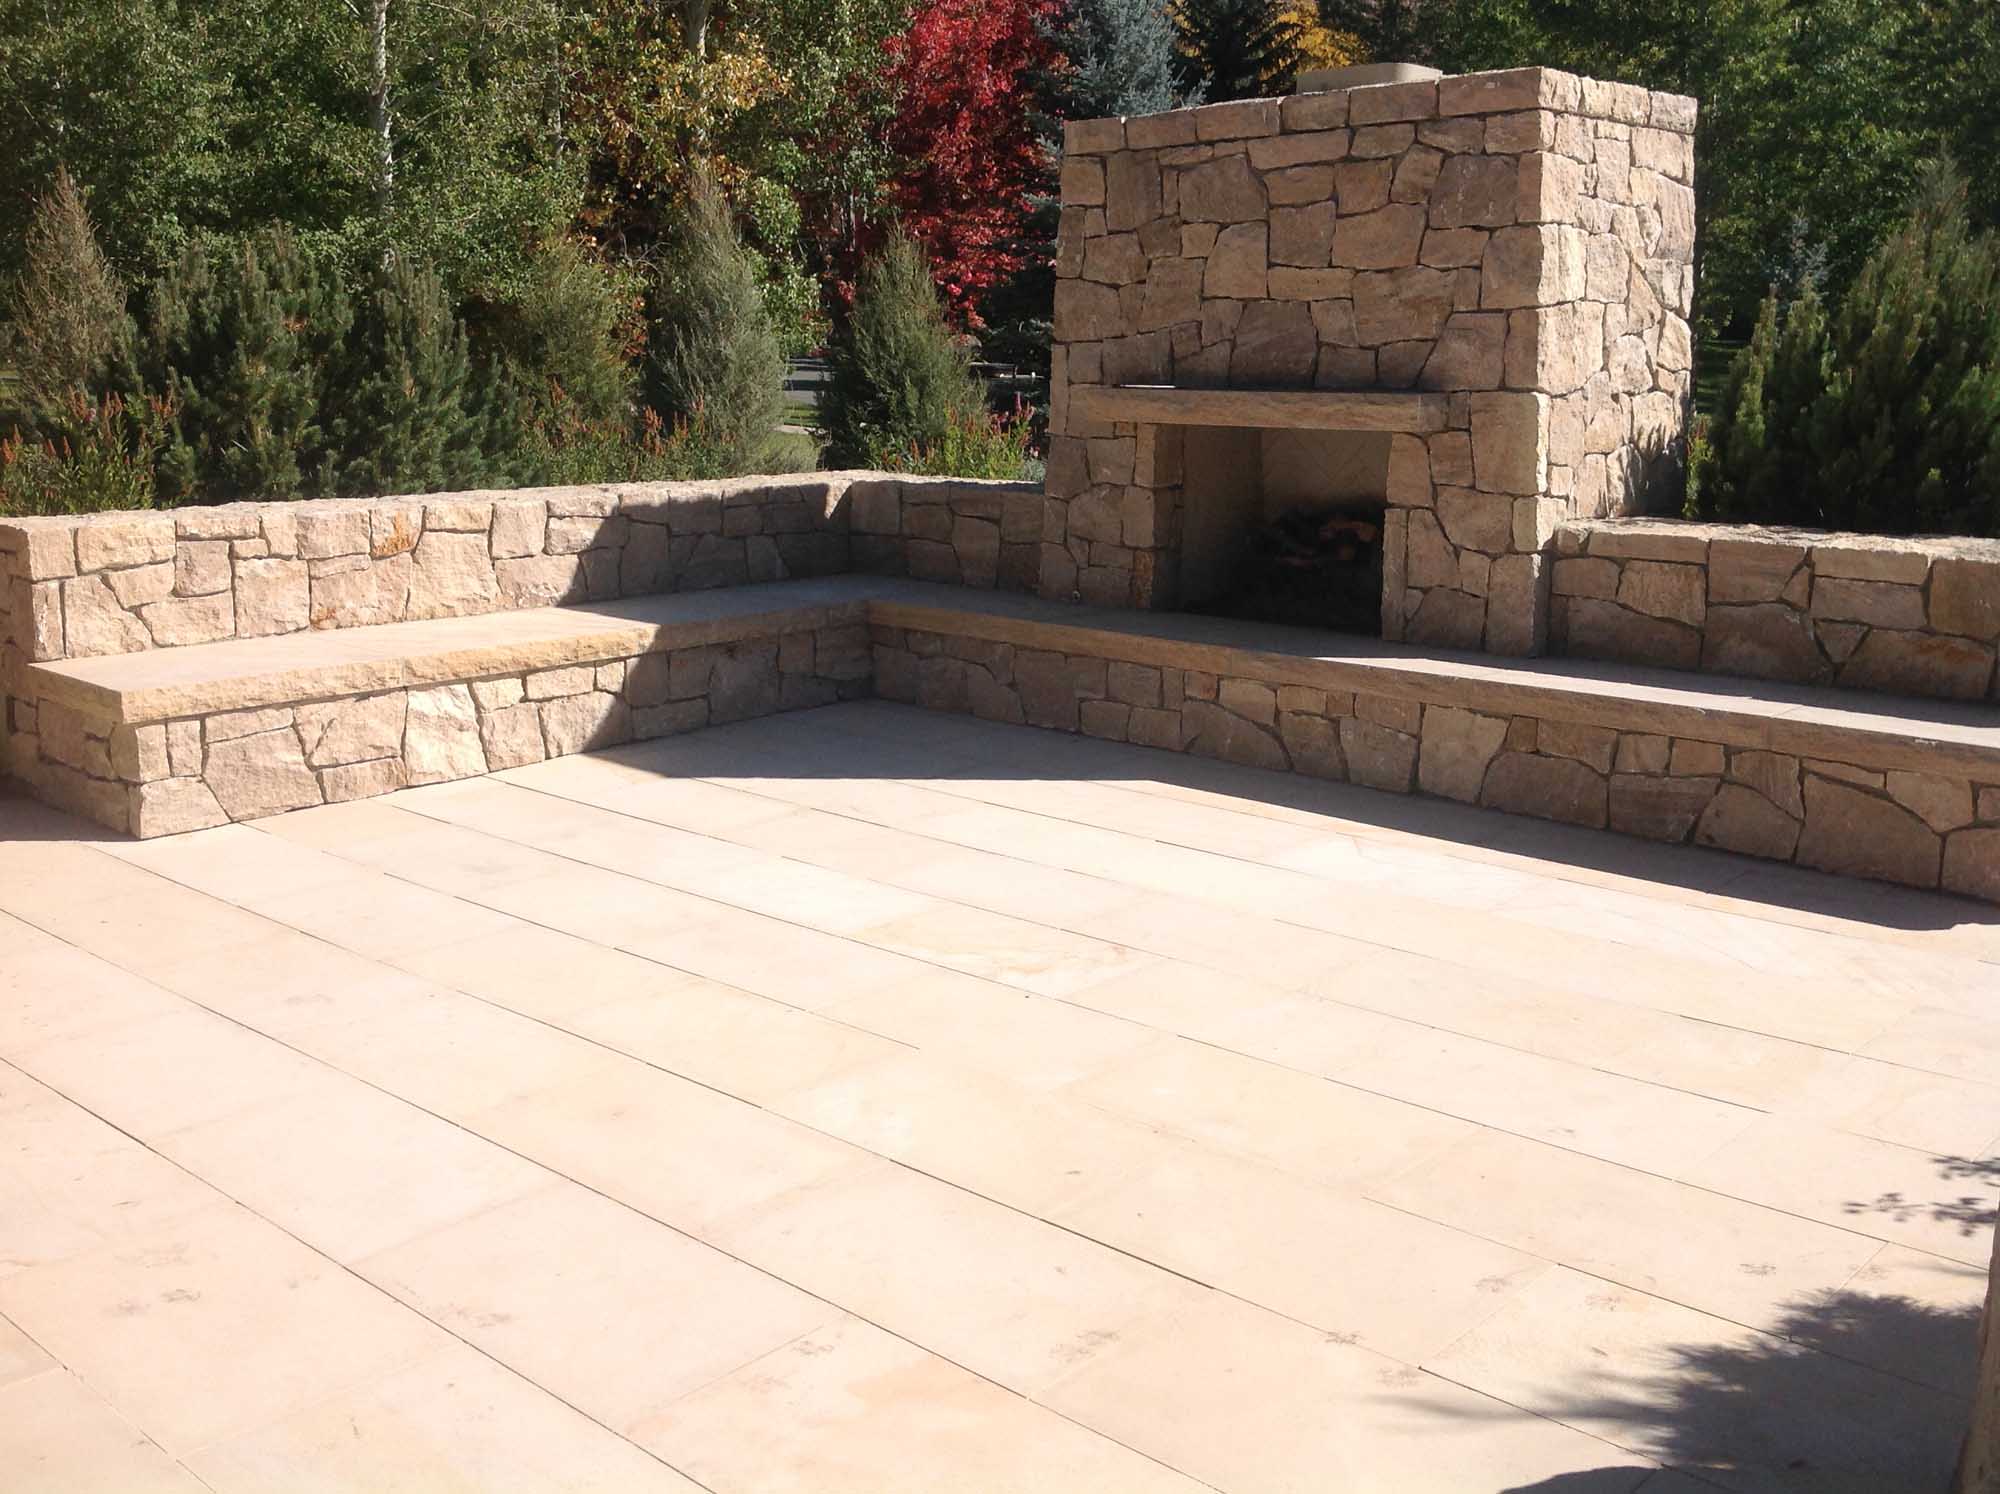 Clearwater Landscaping | Landscape Design | Sun Valley, Hailey, Ketchum, Idaho